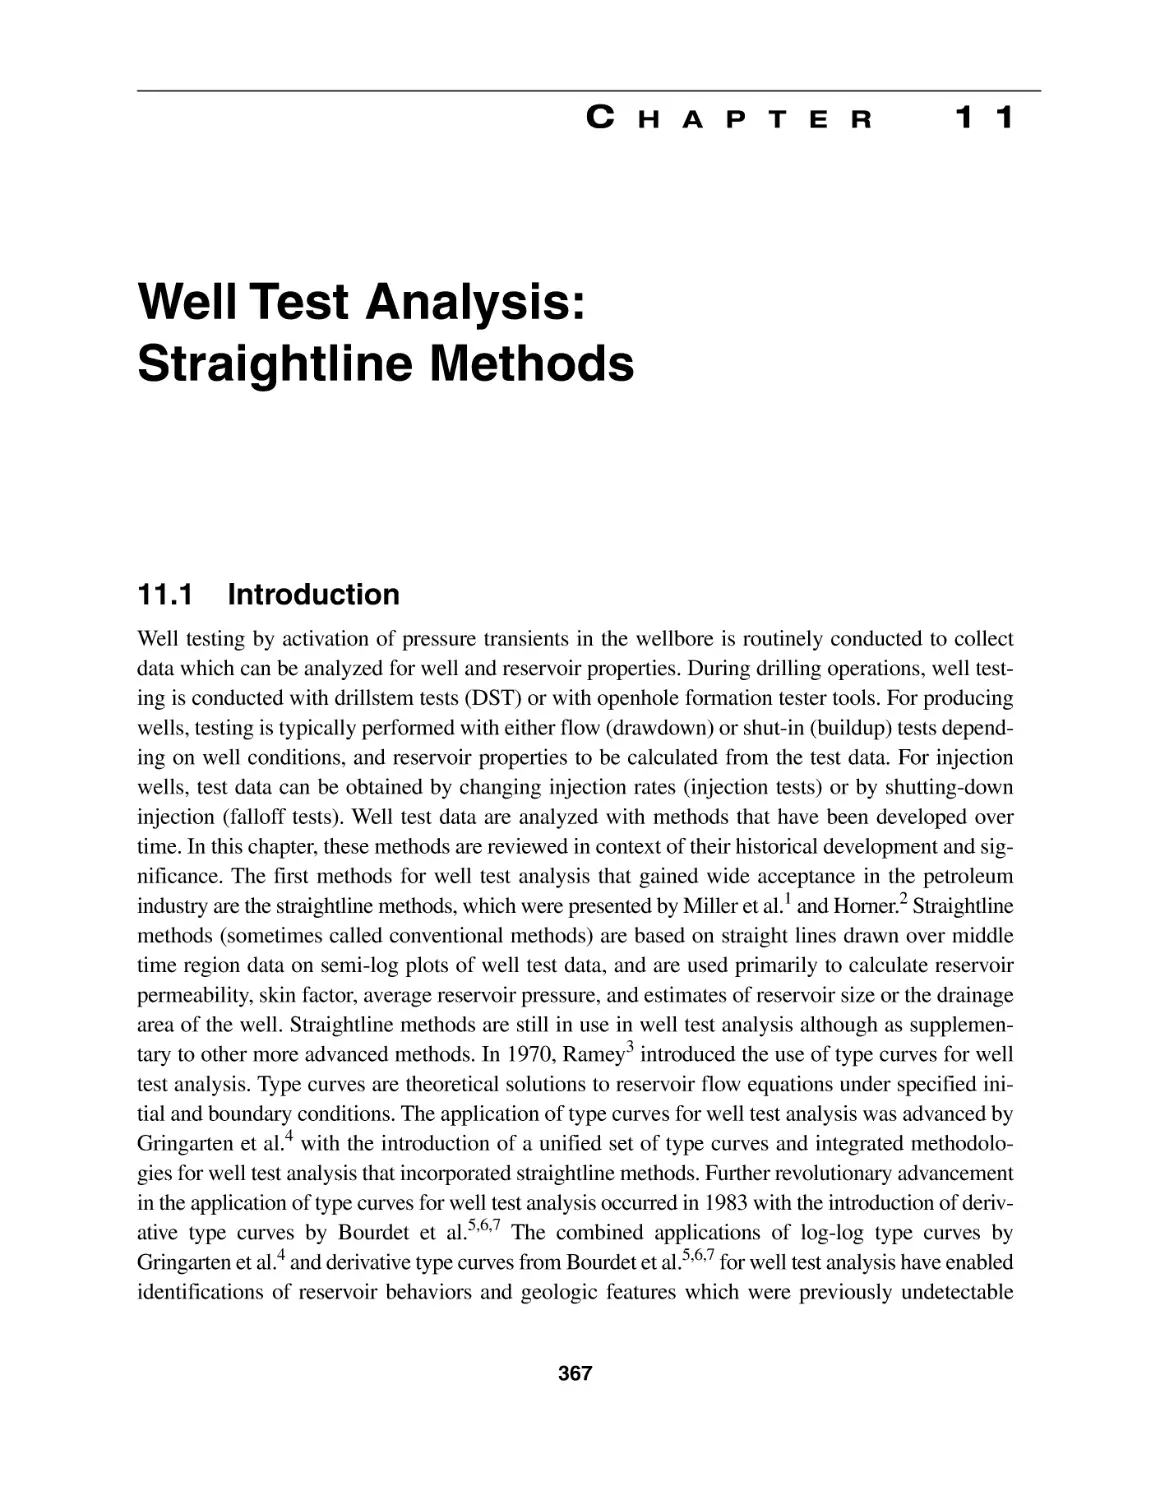 Chapter 11 Well Test Analysis
11.1 Introduction